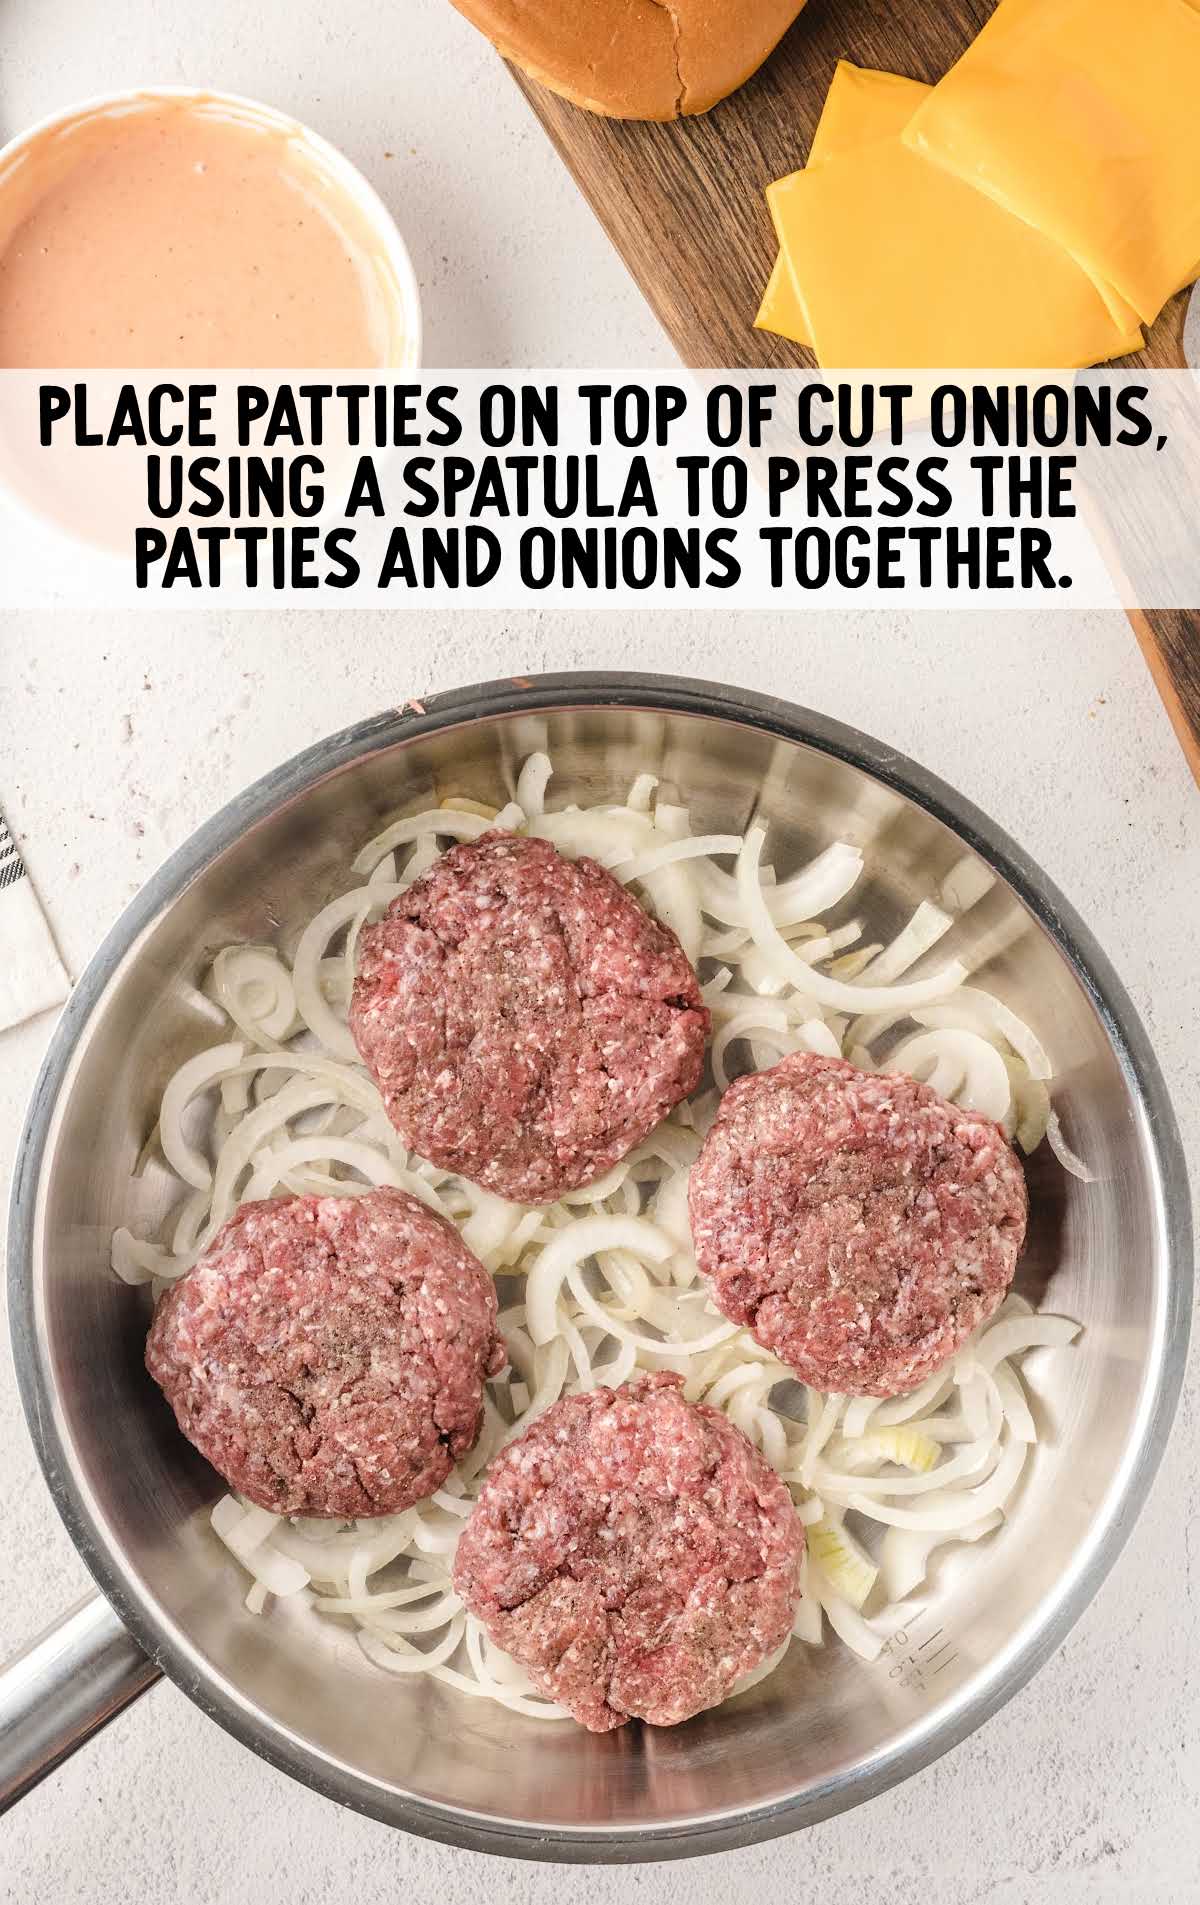 raw burgers laid on top of cut onions on a skillet